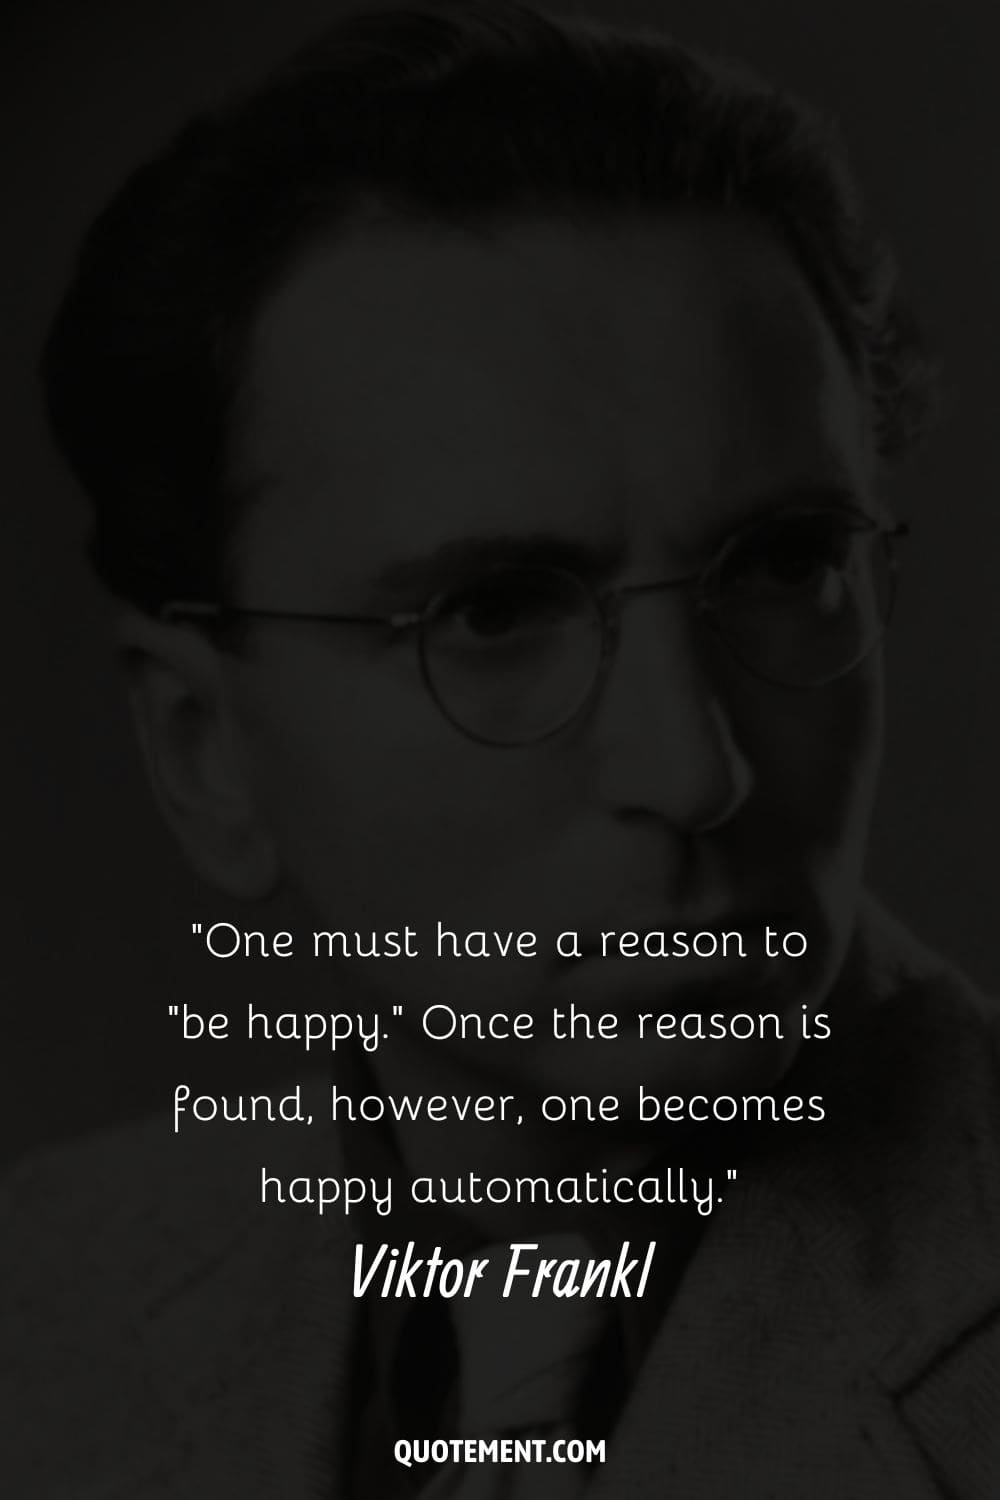 Image of Viktor Frankl representing his quote on being happy.